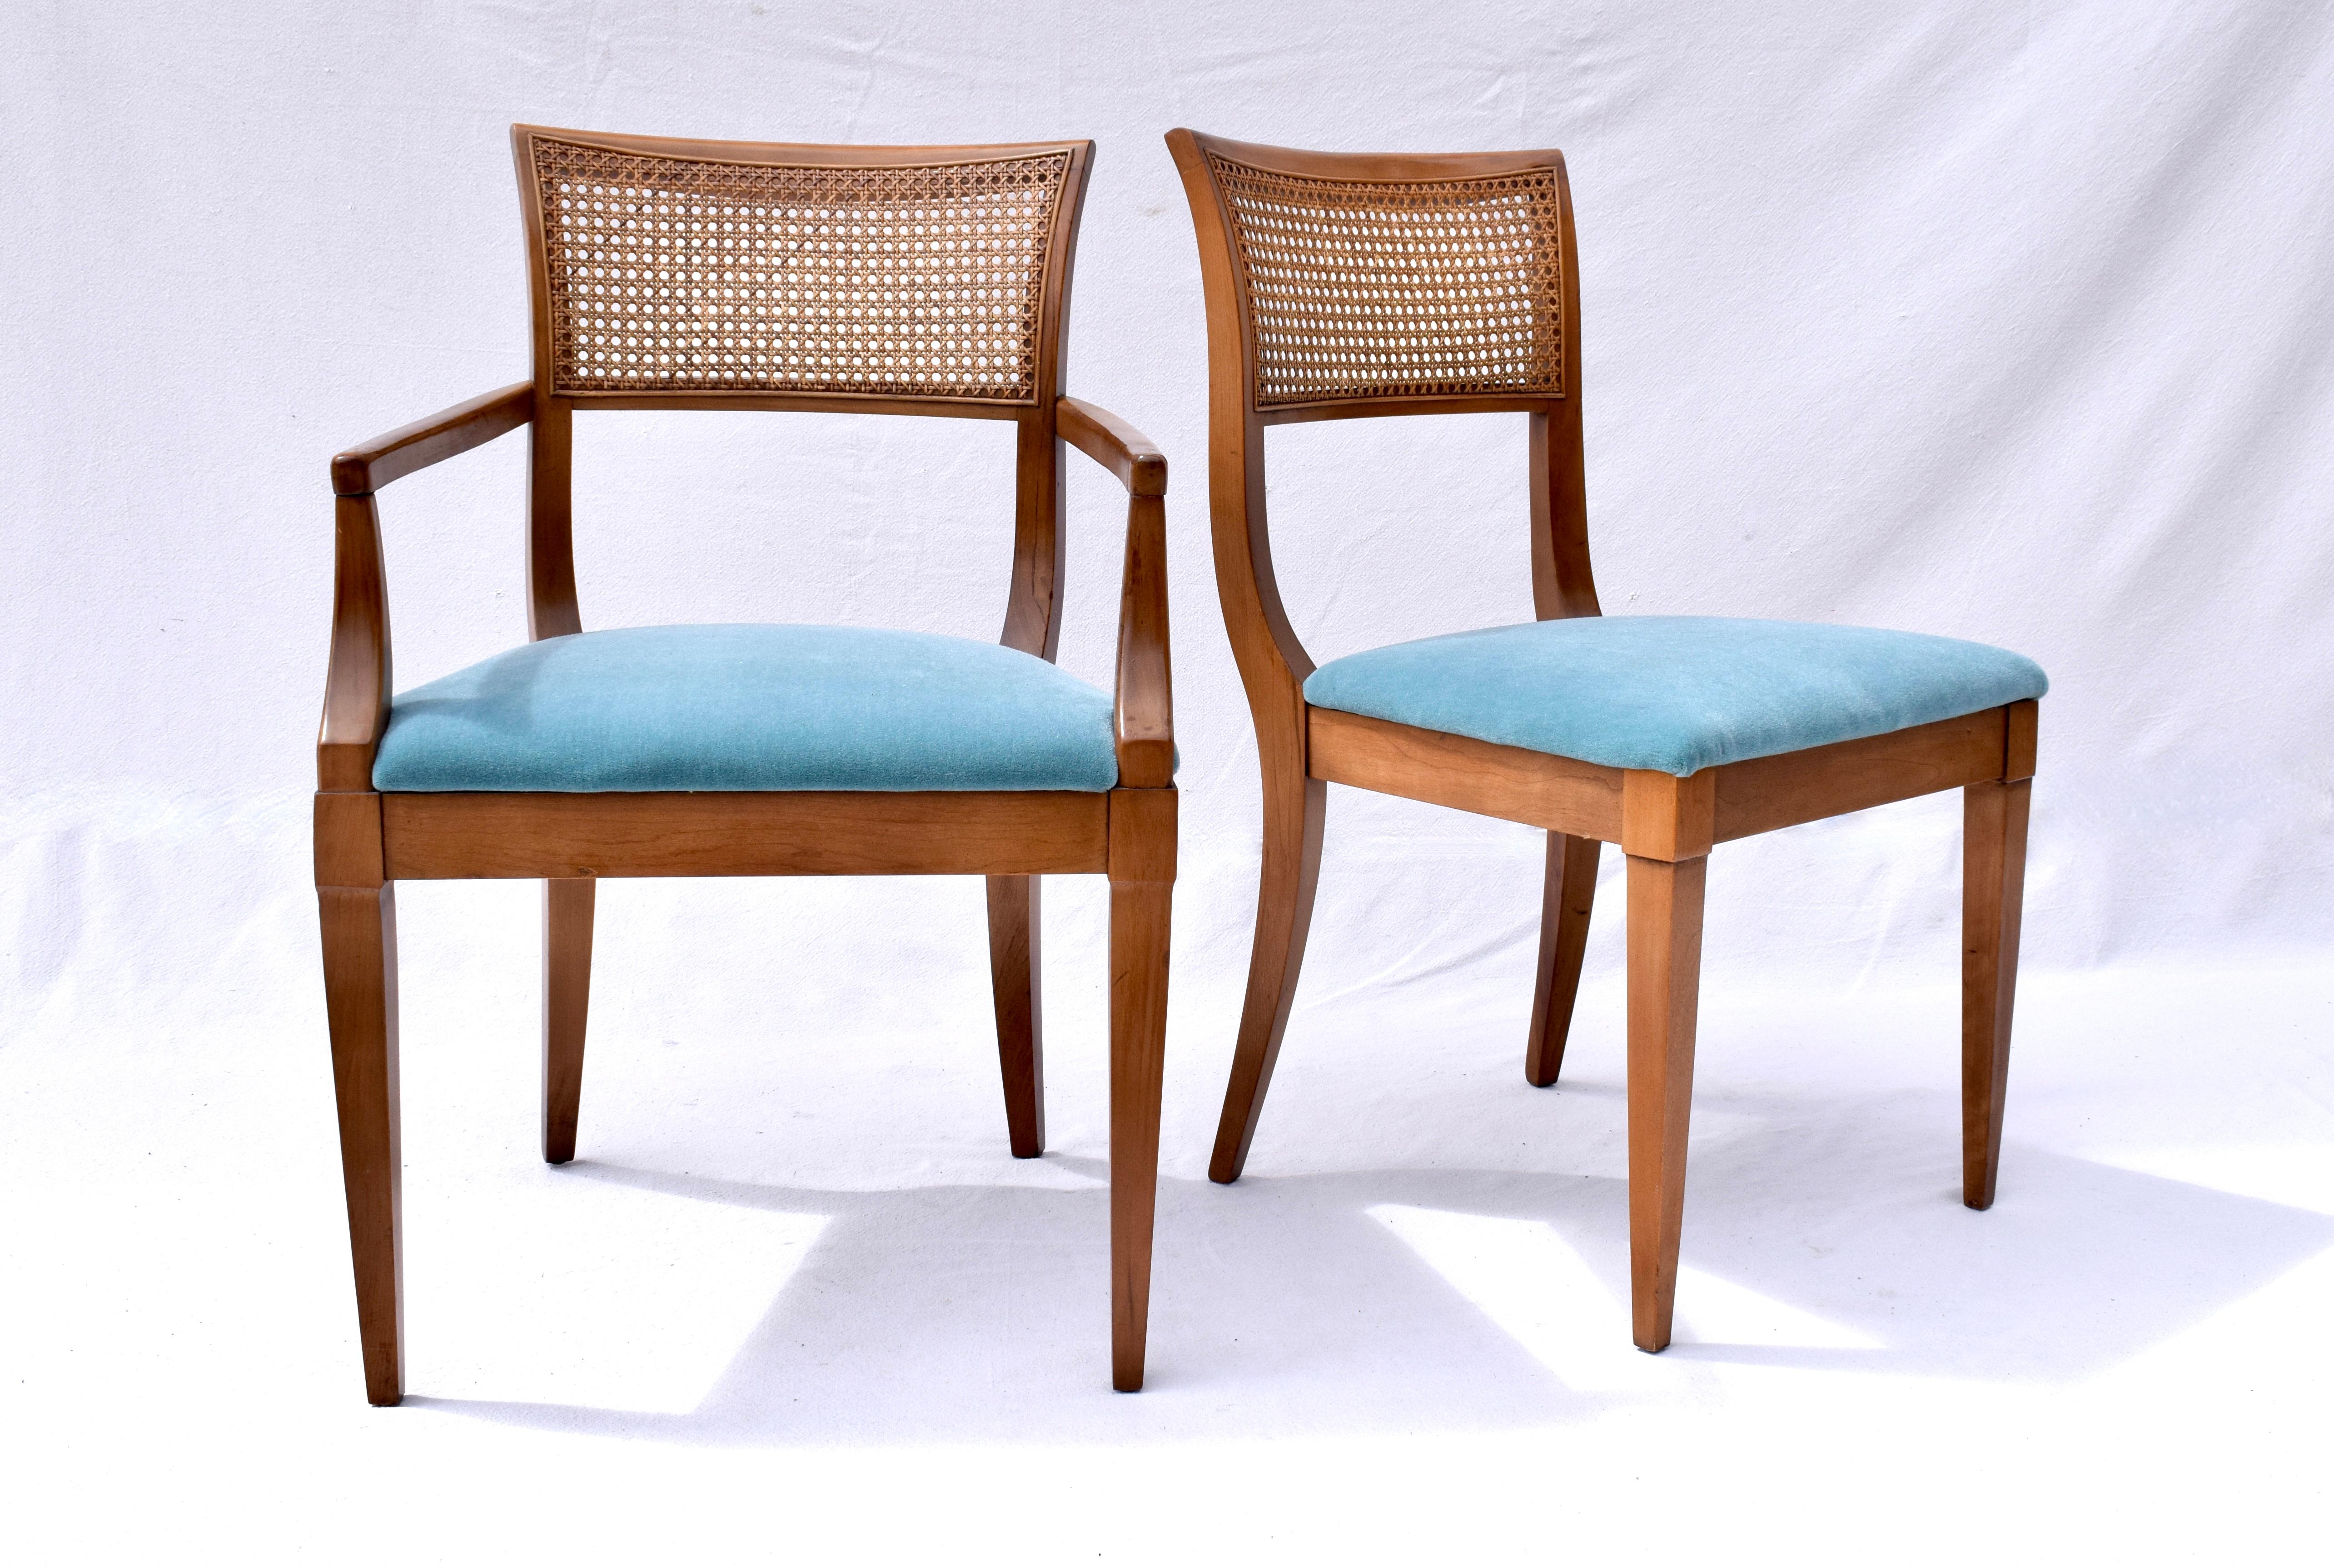 Regency Style Caned Back Dining Chairs in Teal Mohair 2